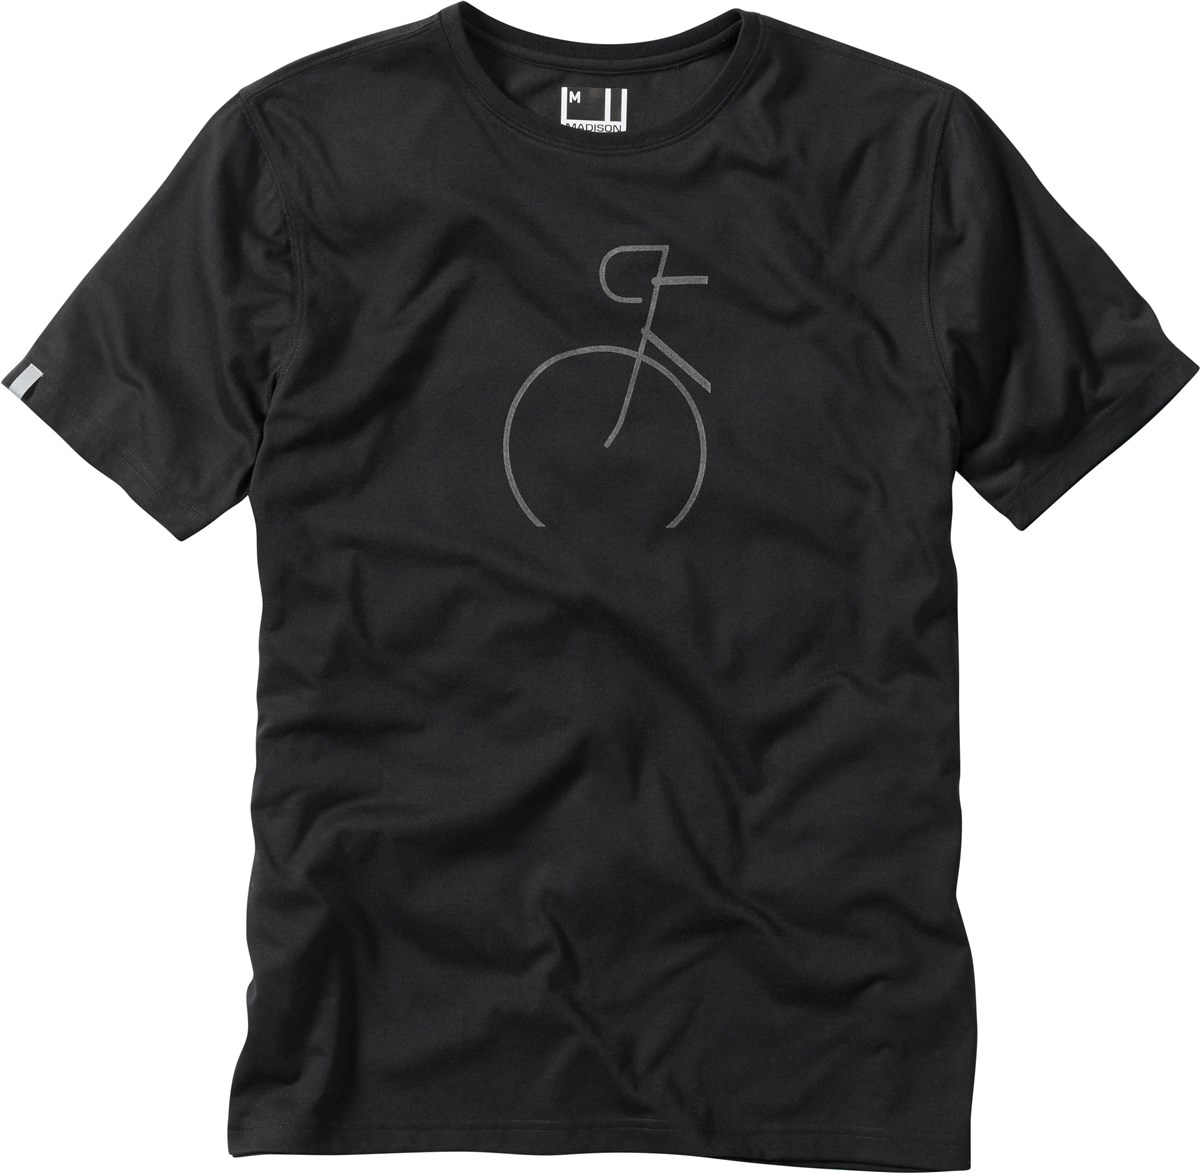 Madison Section Short Sleeve Tech Tee product image